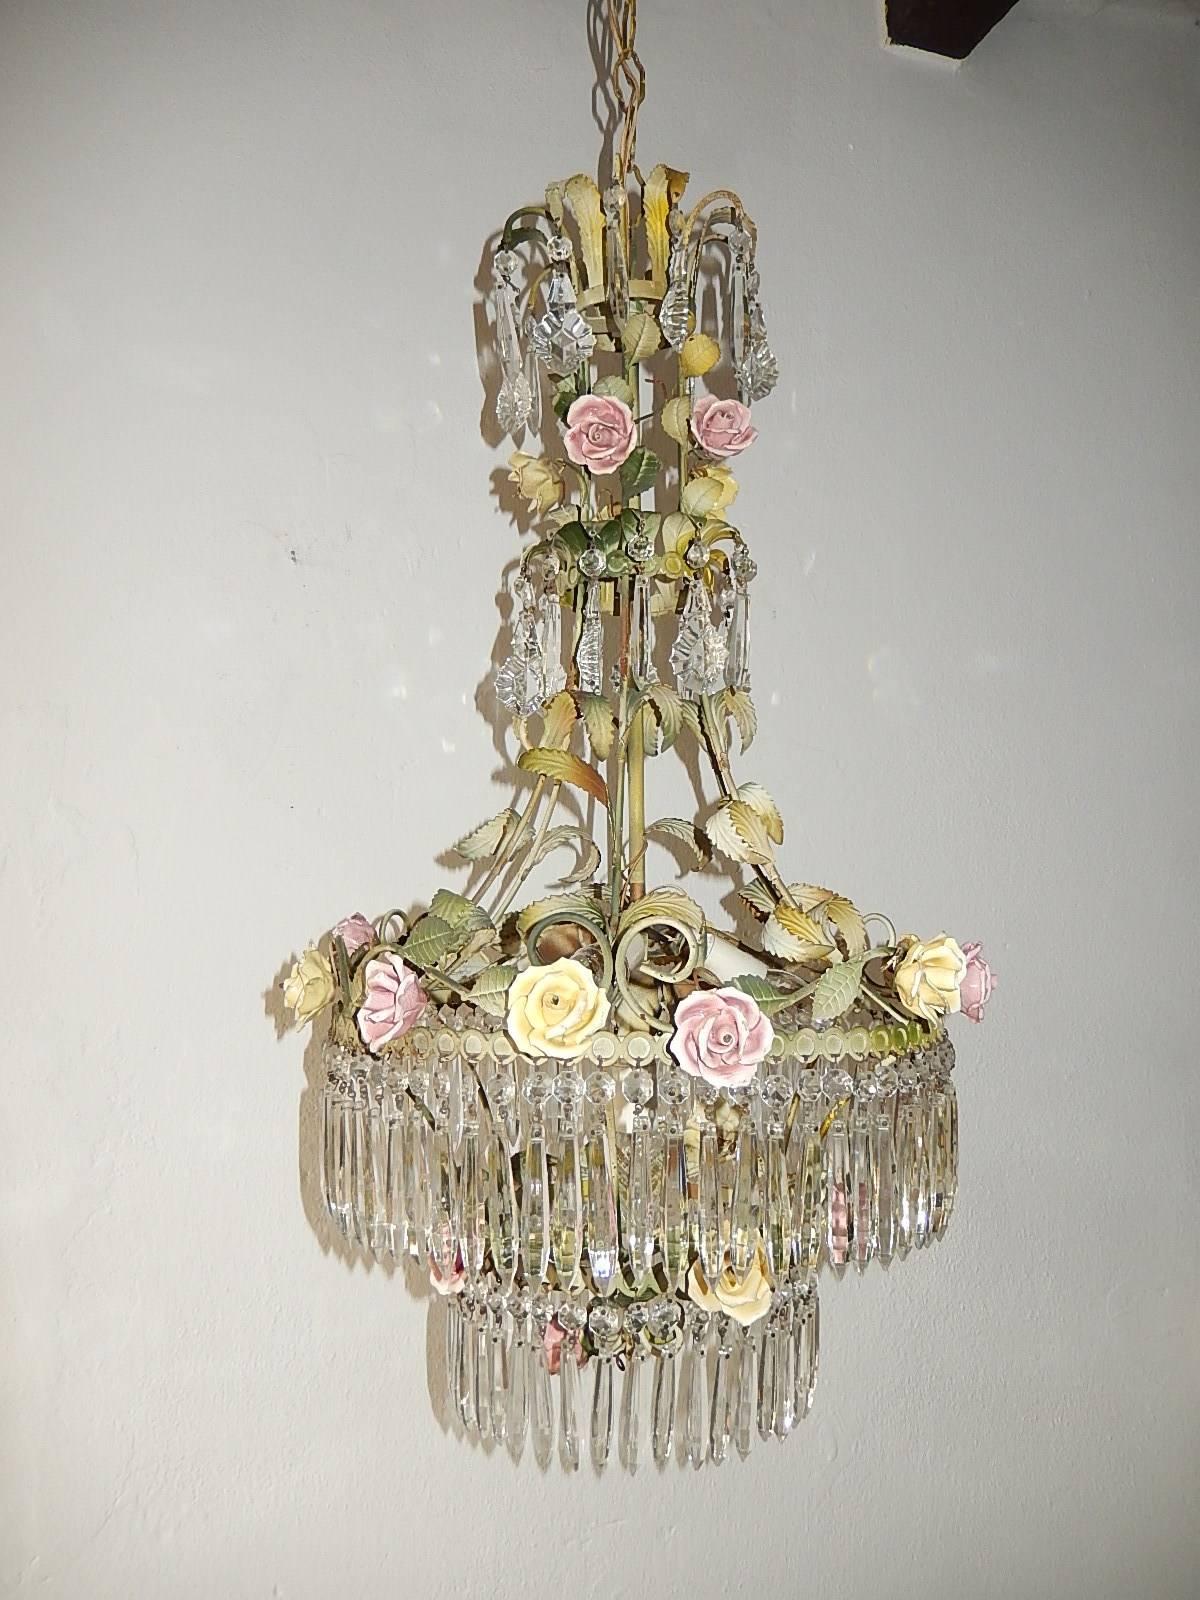 Housing four lights. Original color tole with porcelain roses in pink and yellow. Matching sconces available. Rows of vintage rare shape crystal prisms. Re-wired and ready to hang. Adding another 13